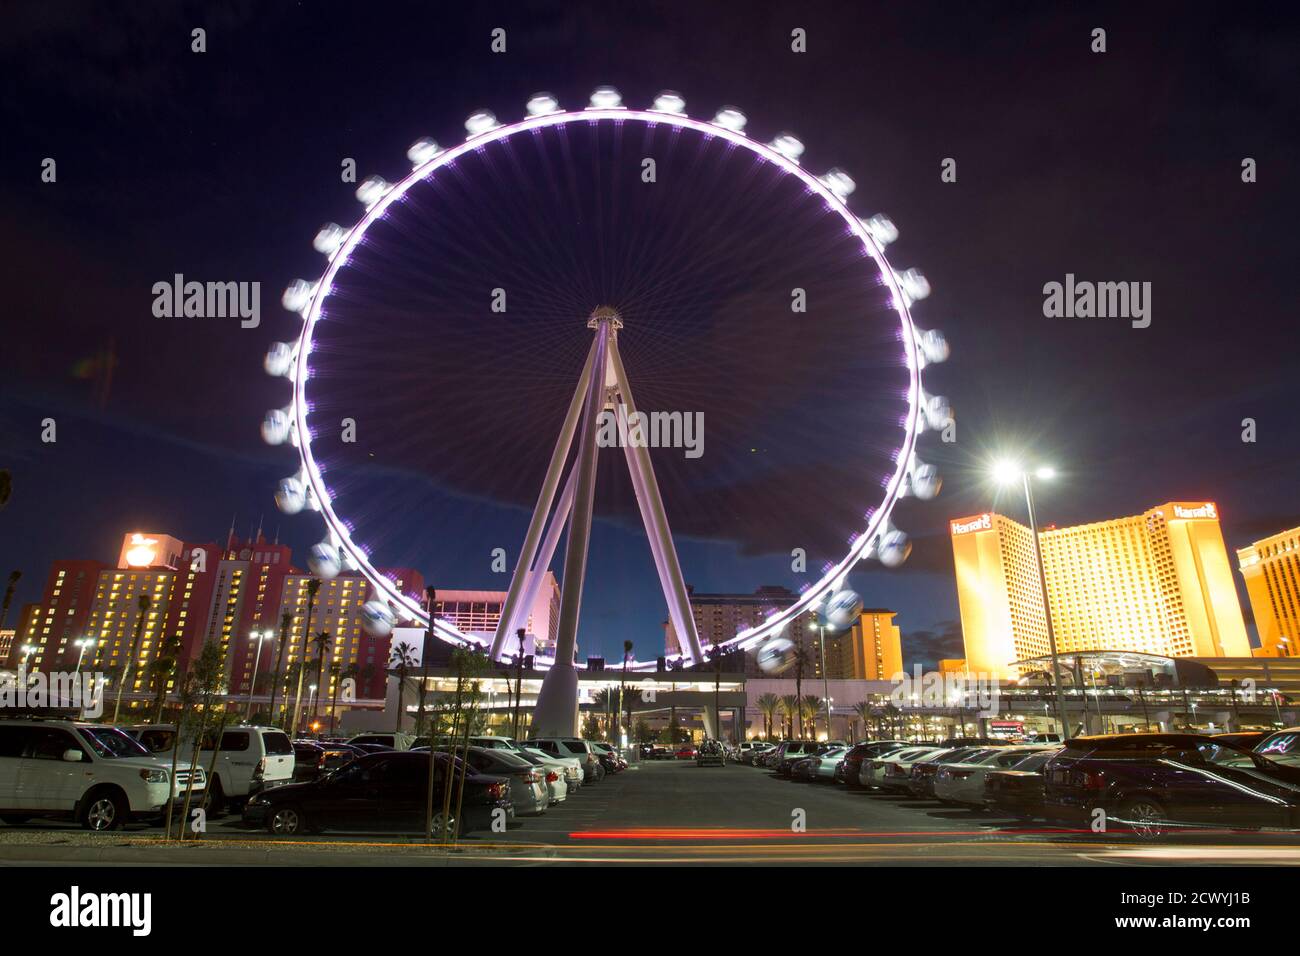 The 550 foot-tall (167.6 m) High Roller observation wheel, the tallest in  the world, in seen in Las Vegas, Nevada April 9, 2014. The wheel is the  centerpiece of the $550 million